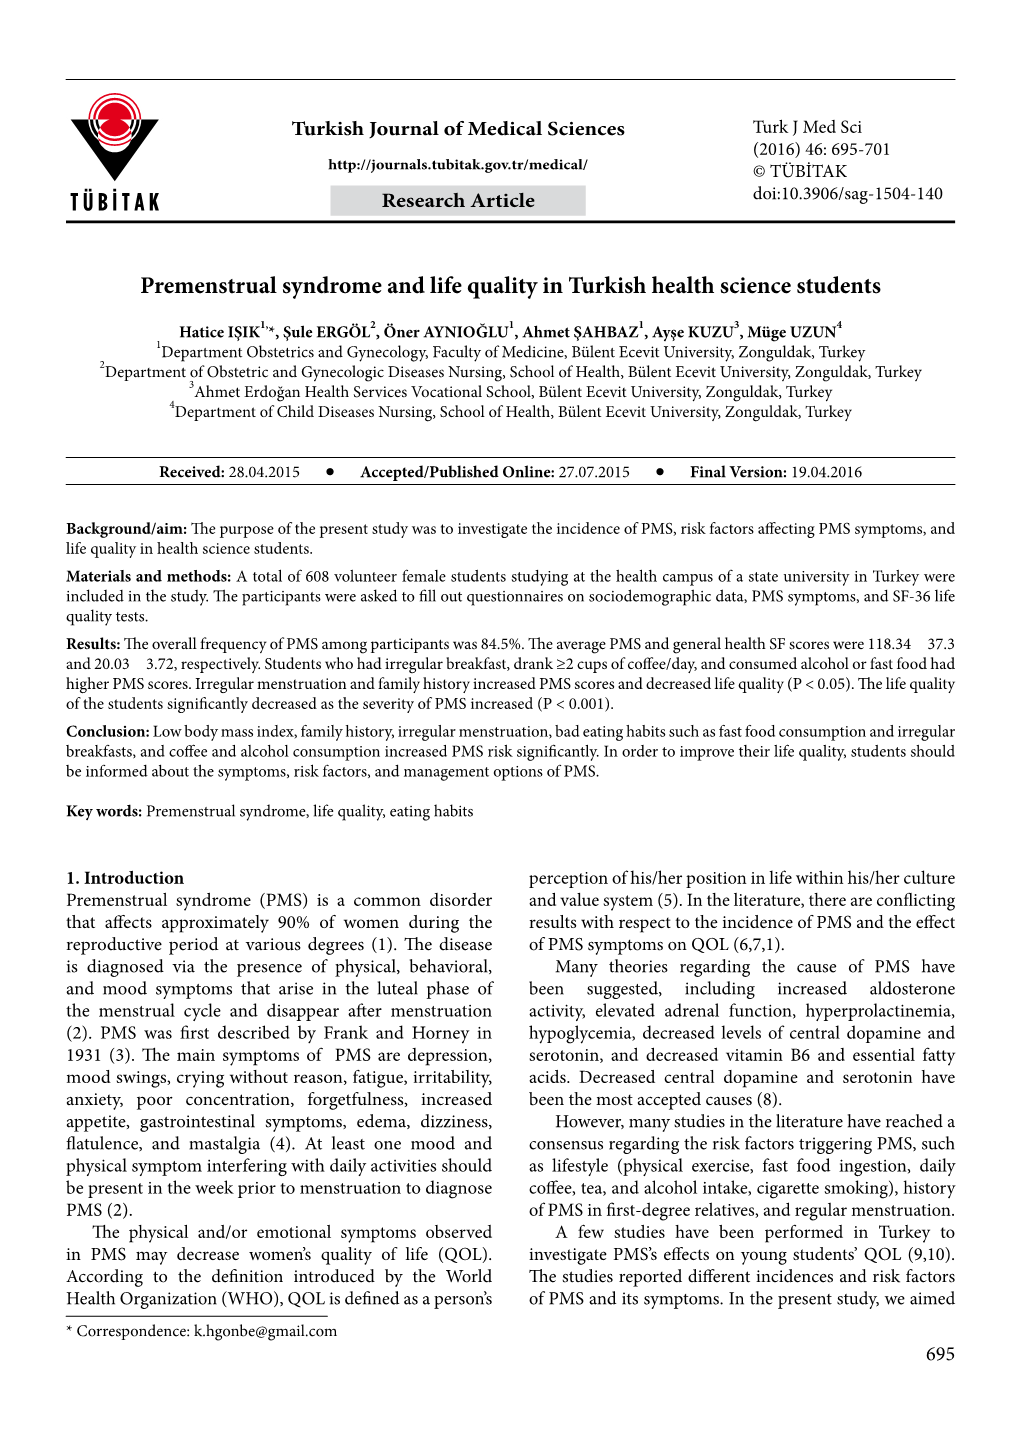 Premenstrual Syndrome and Life Quality in Turkish Health Science Students